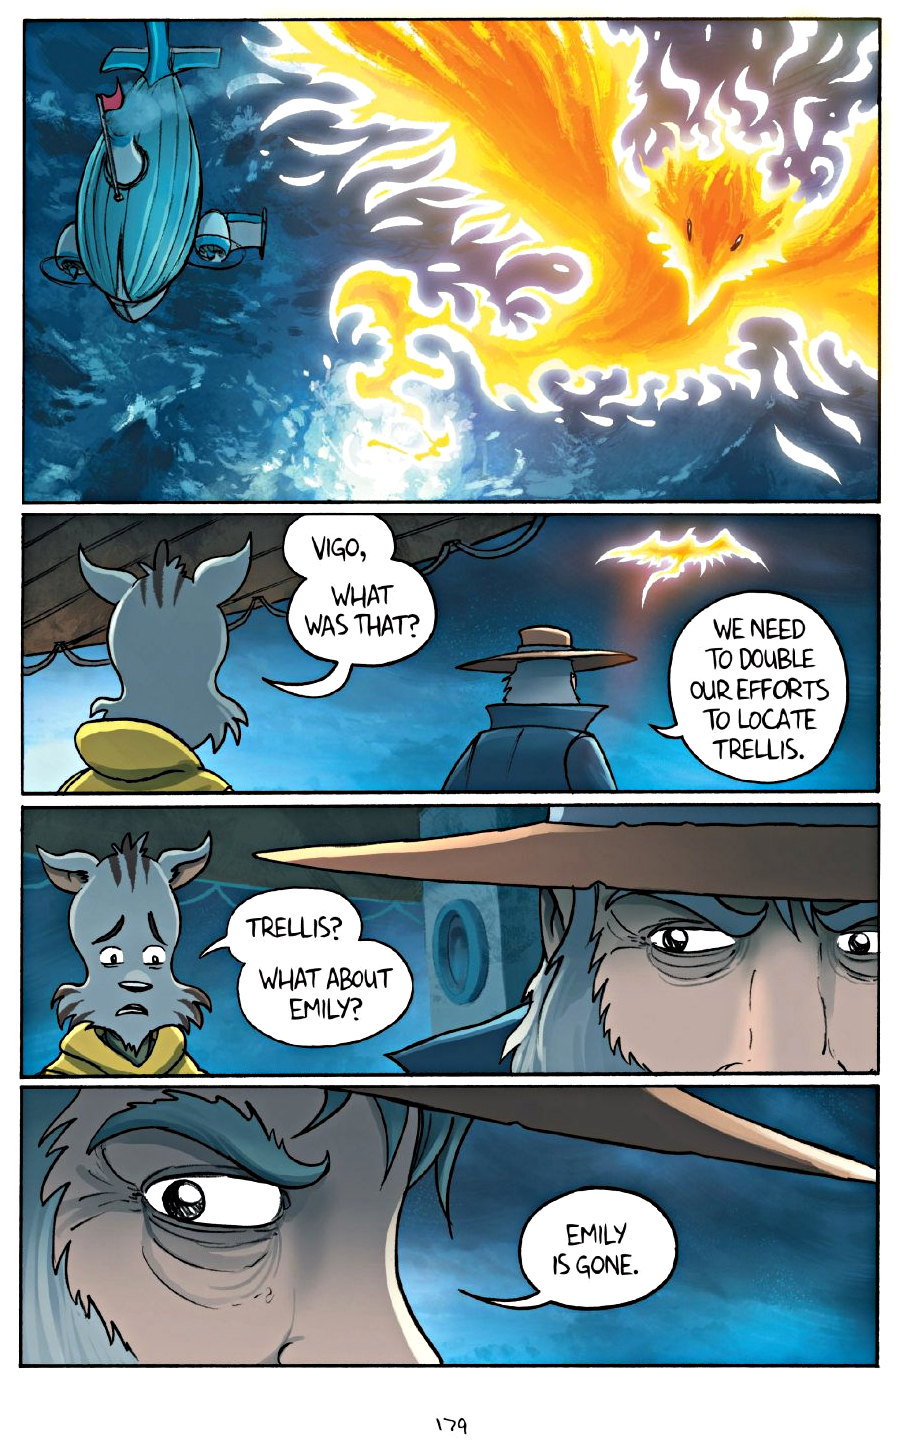 page 179 of amulet 7 firelight graphic novel